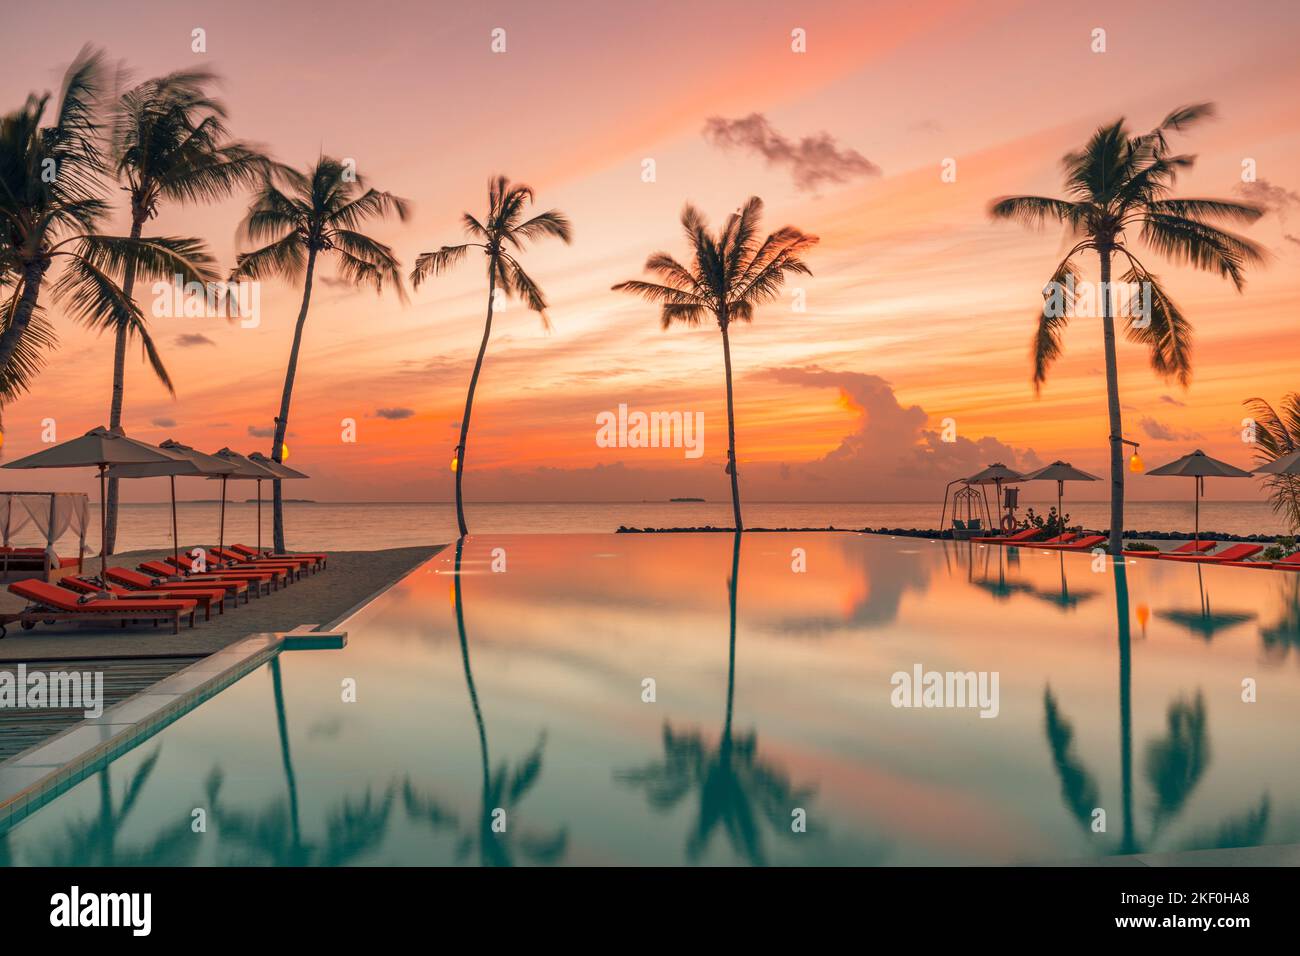 Fantastic poolside, sunset sky, palm trees reflection. Luxury tropical beach landscape, infinity swimming pool, deck chairs bed under umbrellas Stock Photo